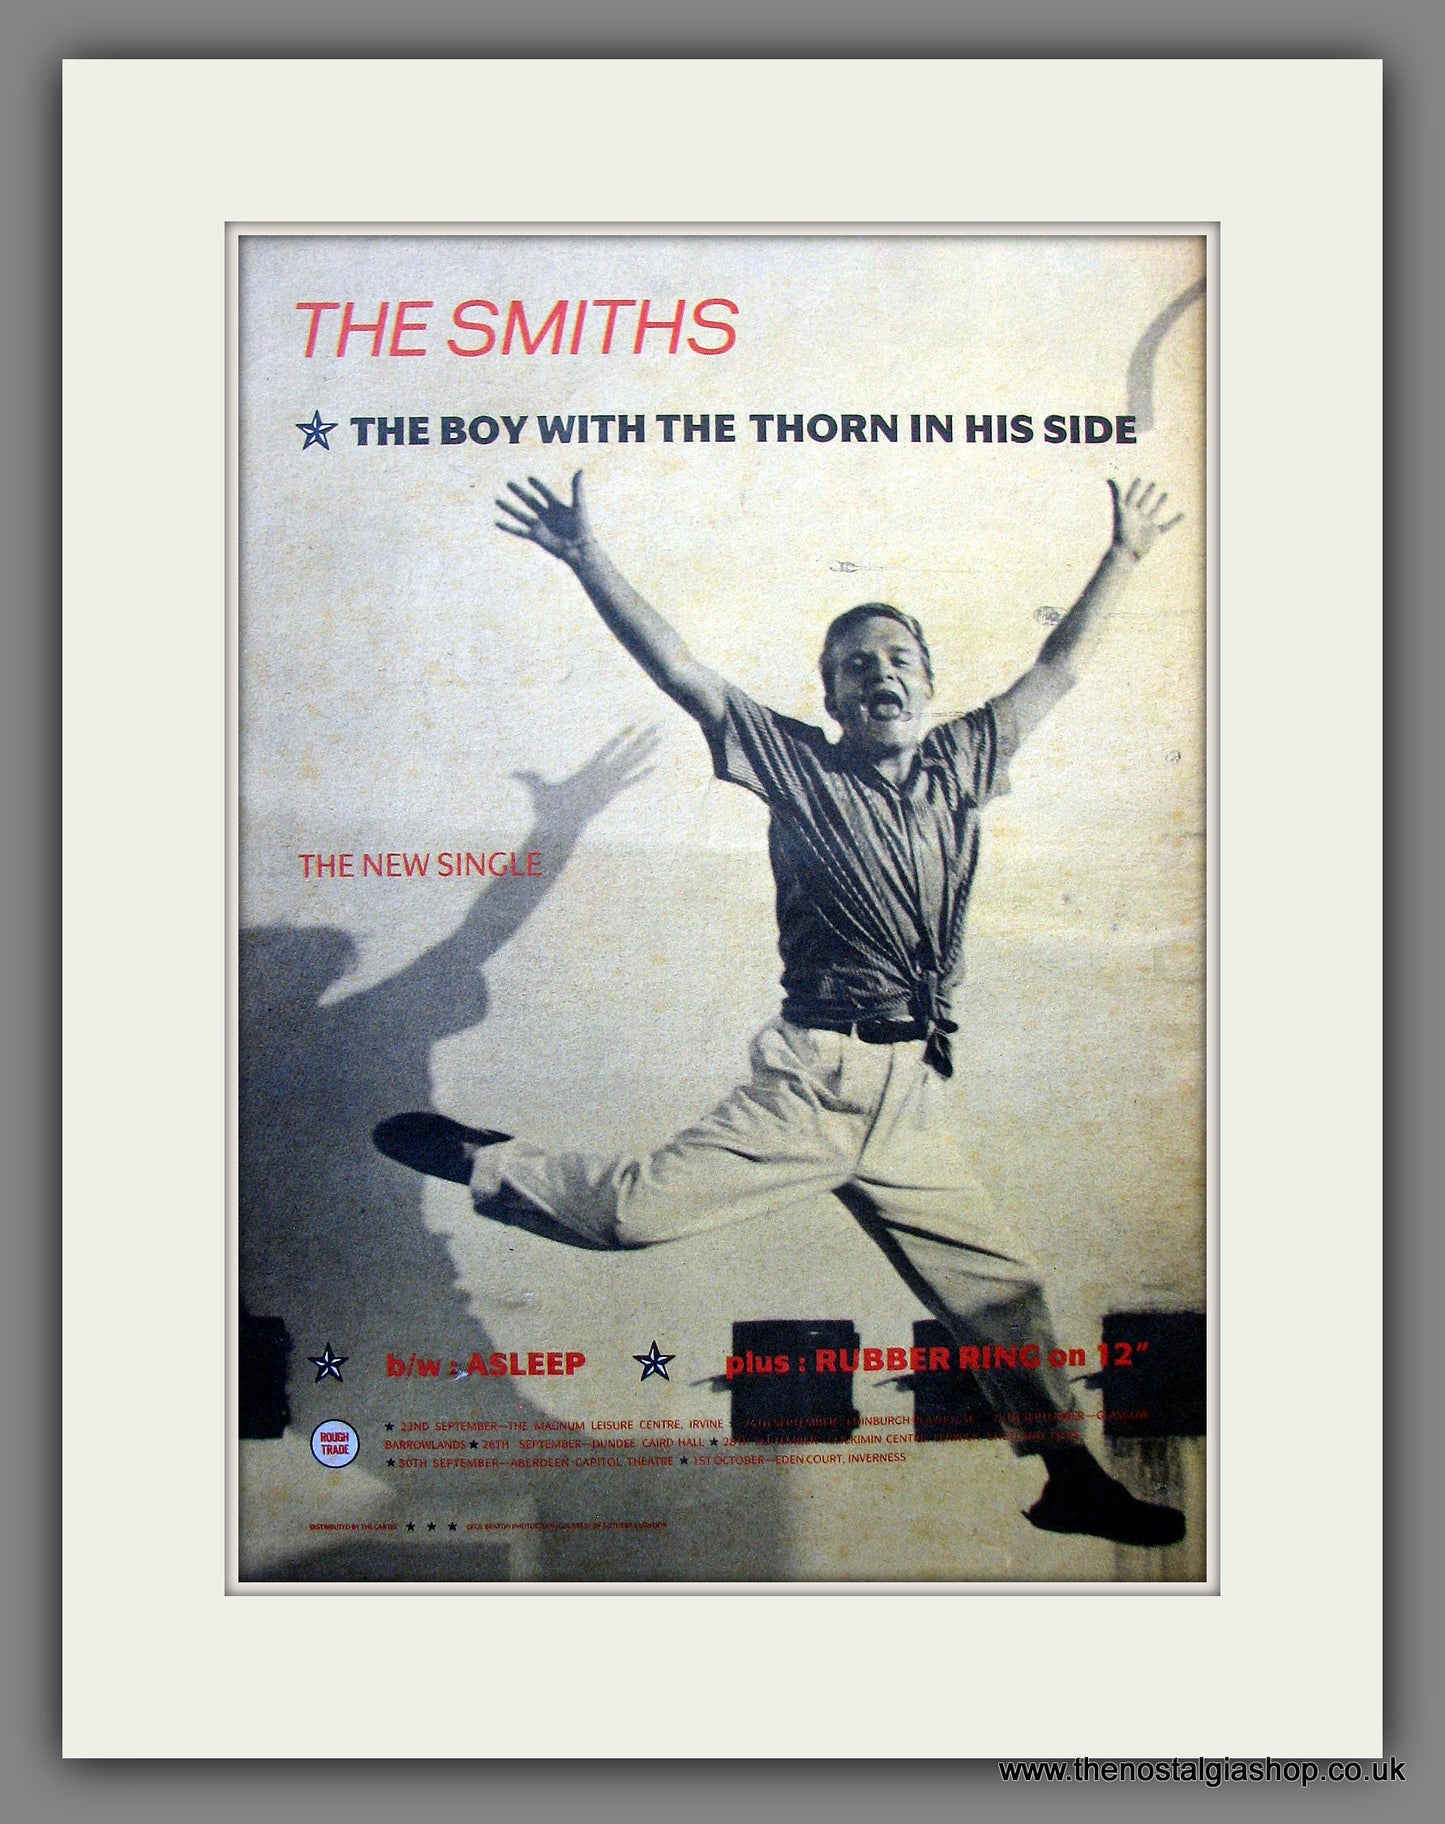 Smiths (The) The Boy With The Thorn In His Side. Original Advert 1985 (ref AD13739)